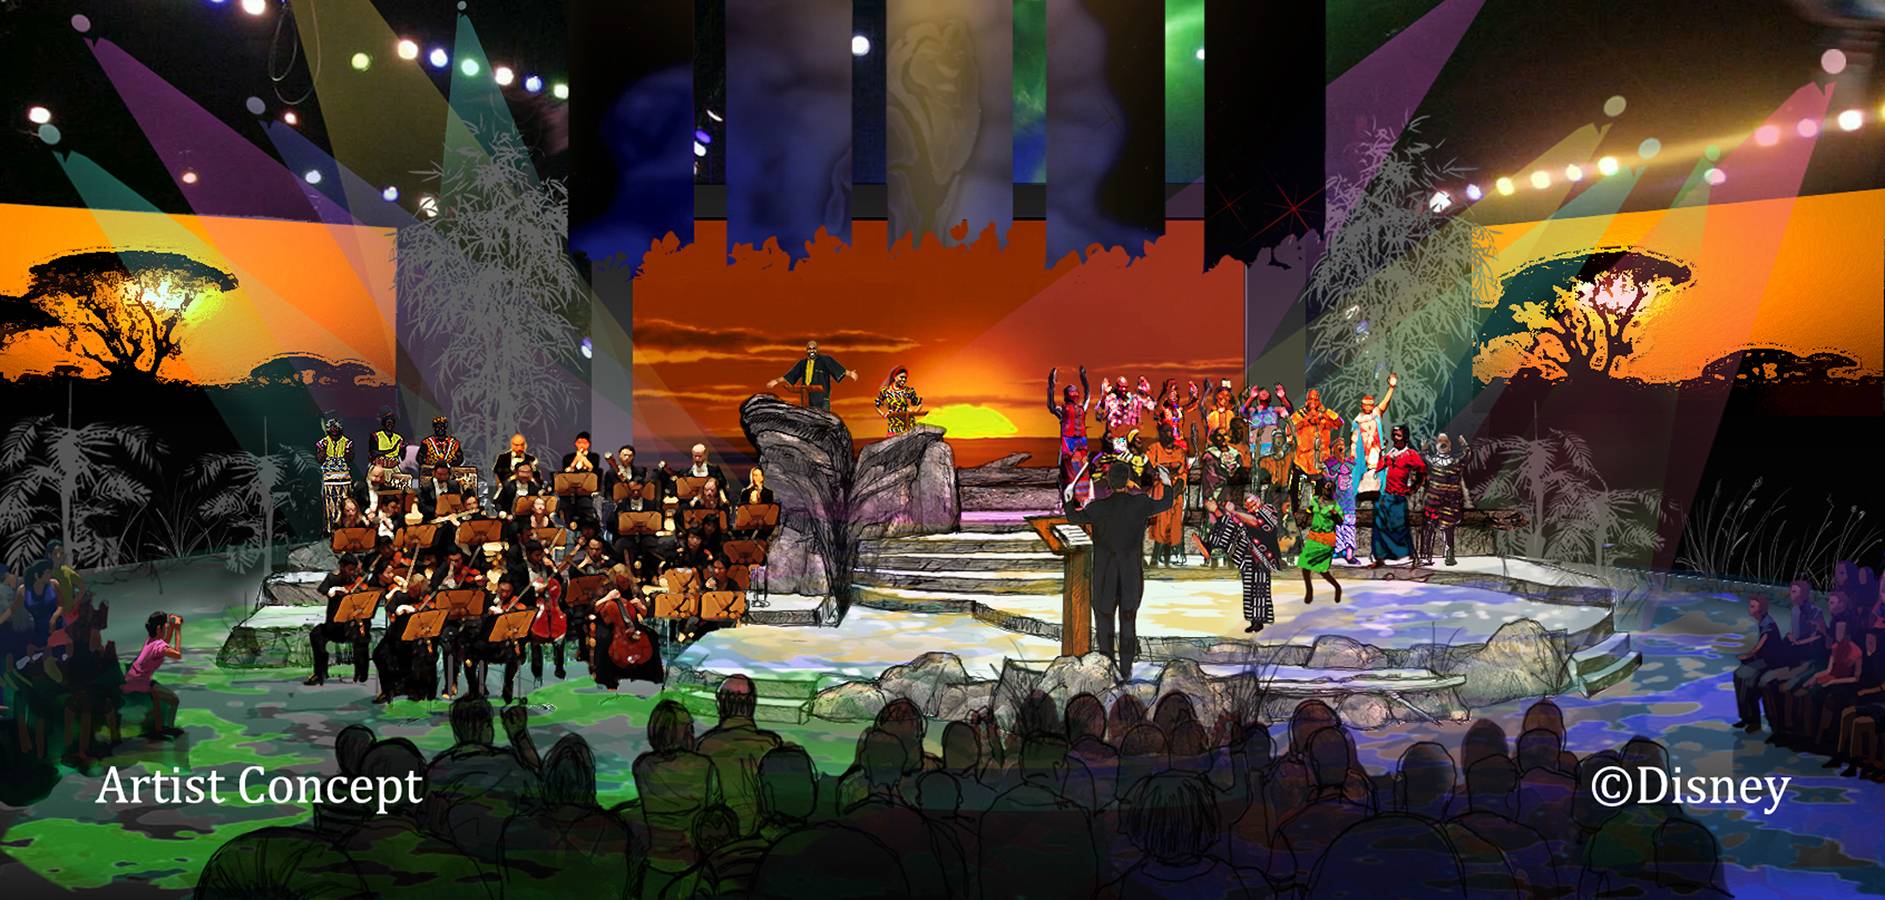 Harambe Nights - Lion King Concert in the Wild concept art